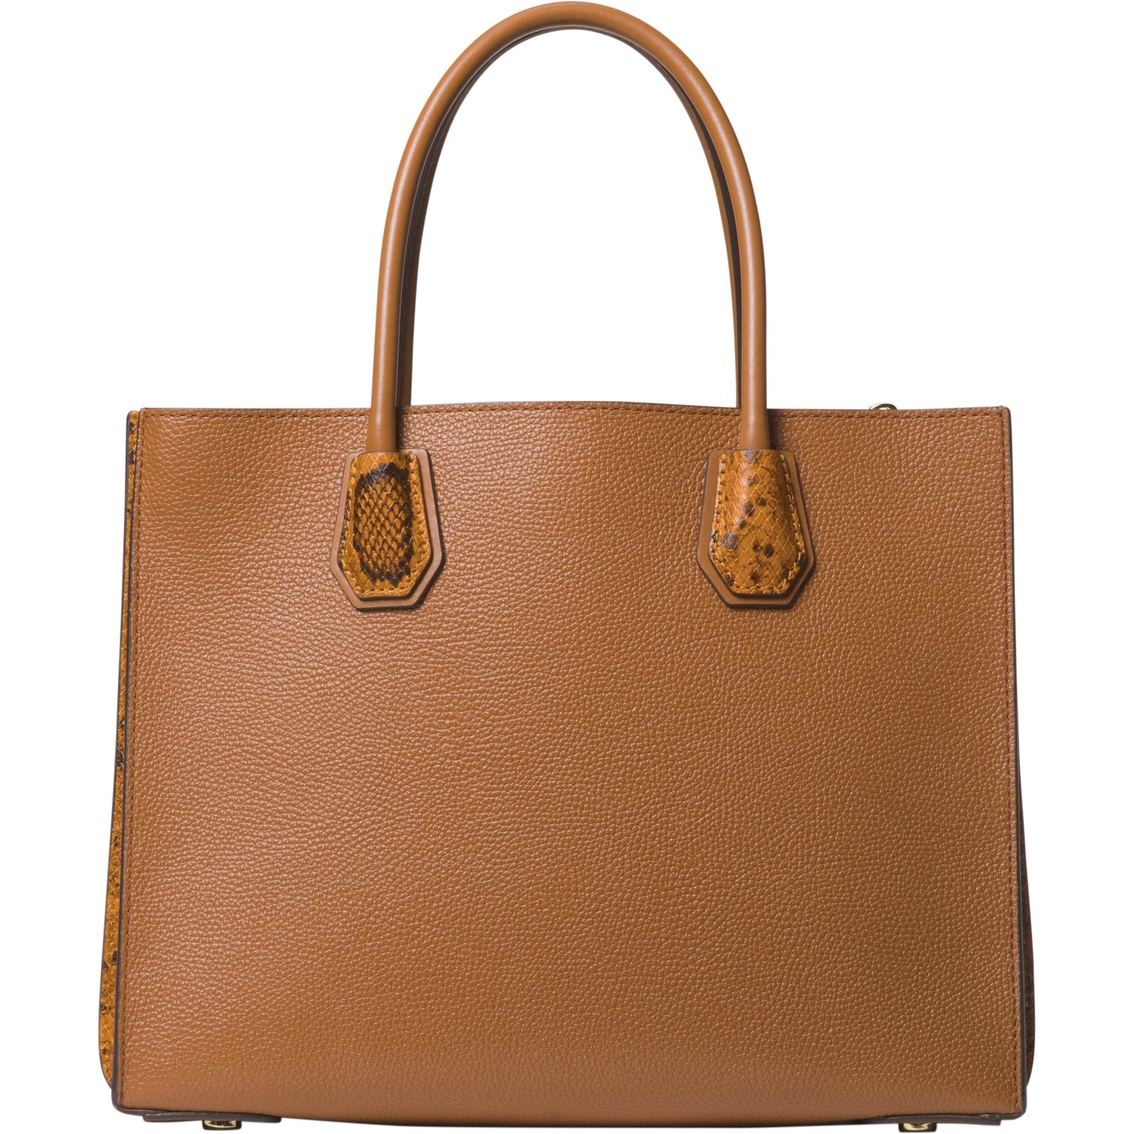 Michael Kors Mercer Large Accordion Convertible Tote | Totes & Shoppers ...